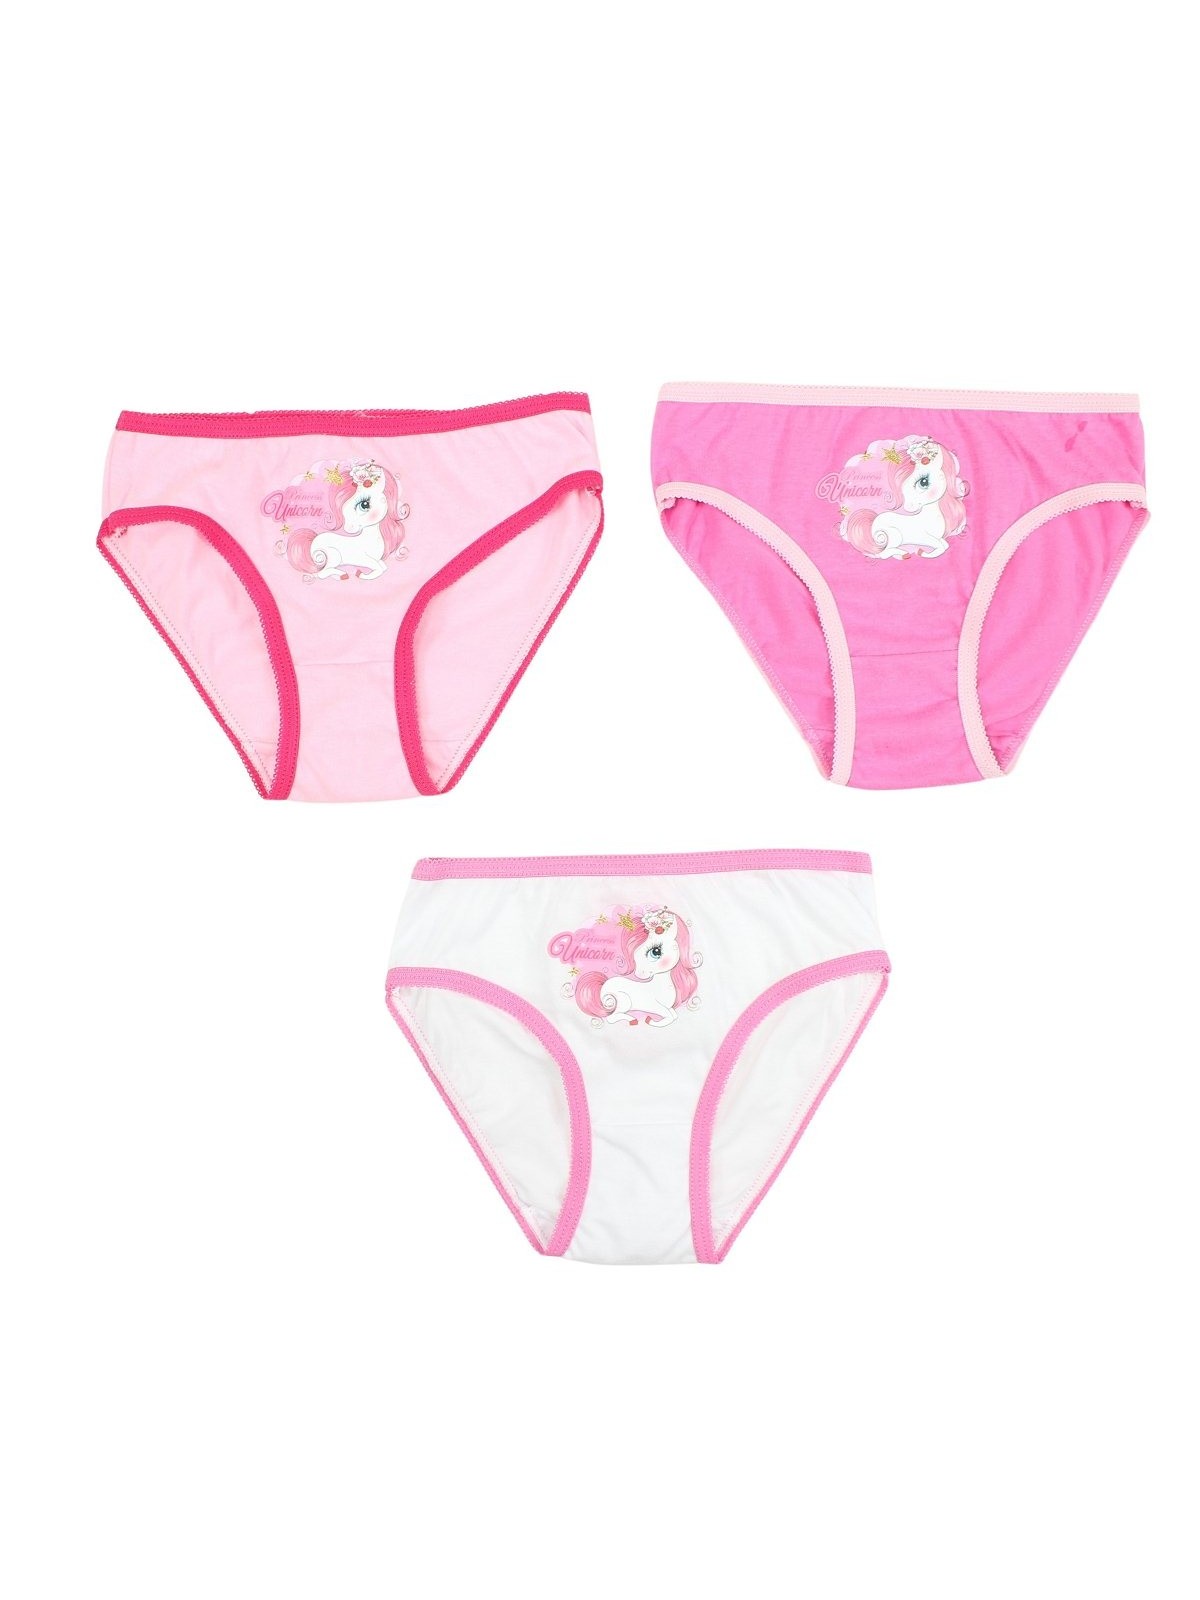 Provider and wholesaler online of underwear brand boy and girl